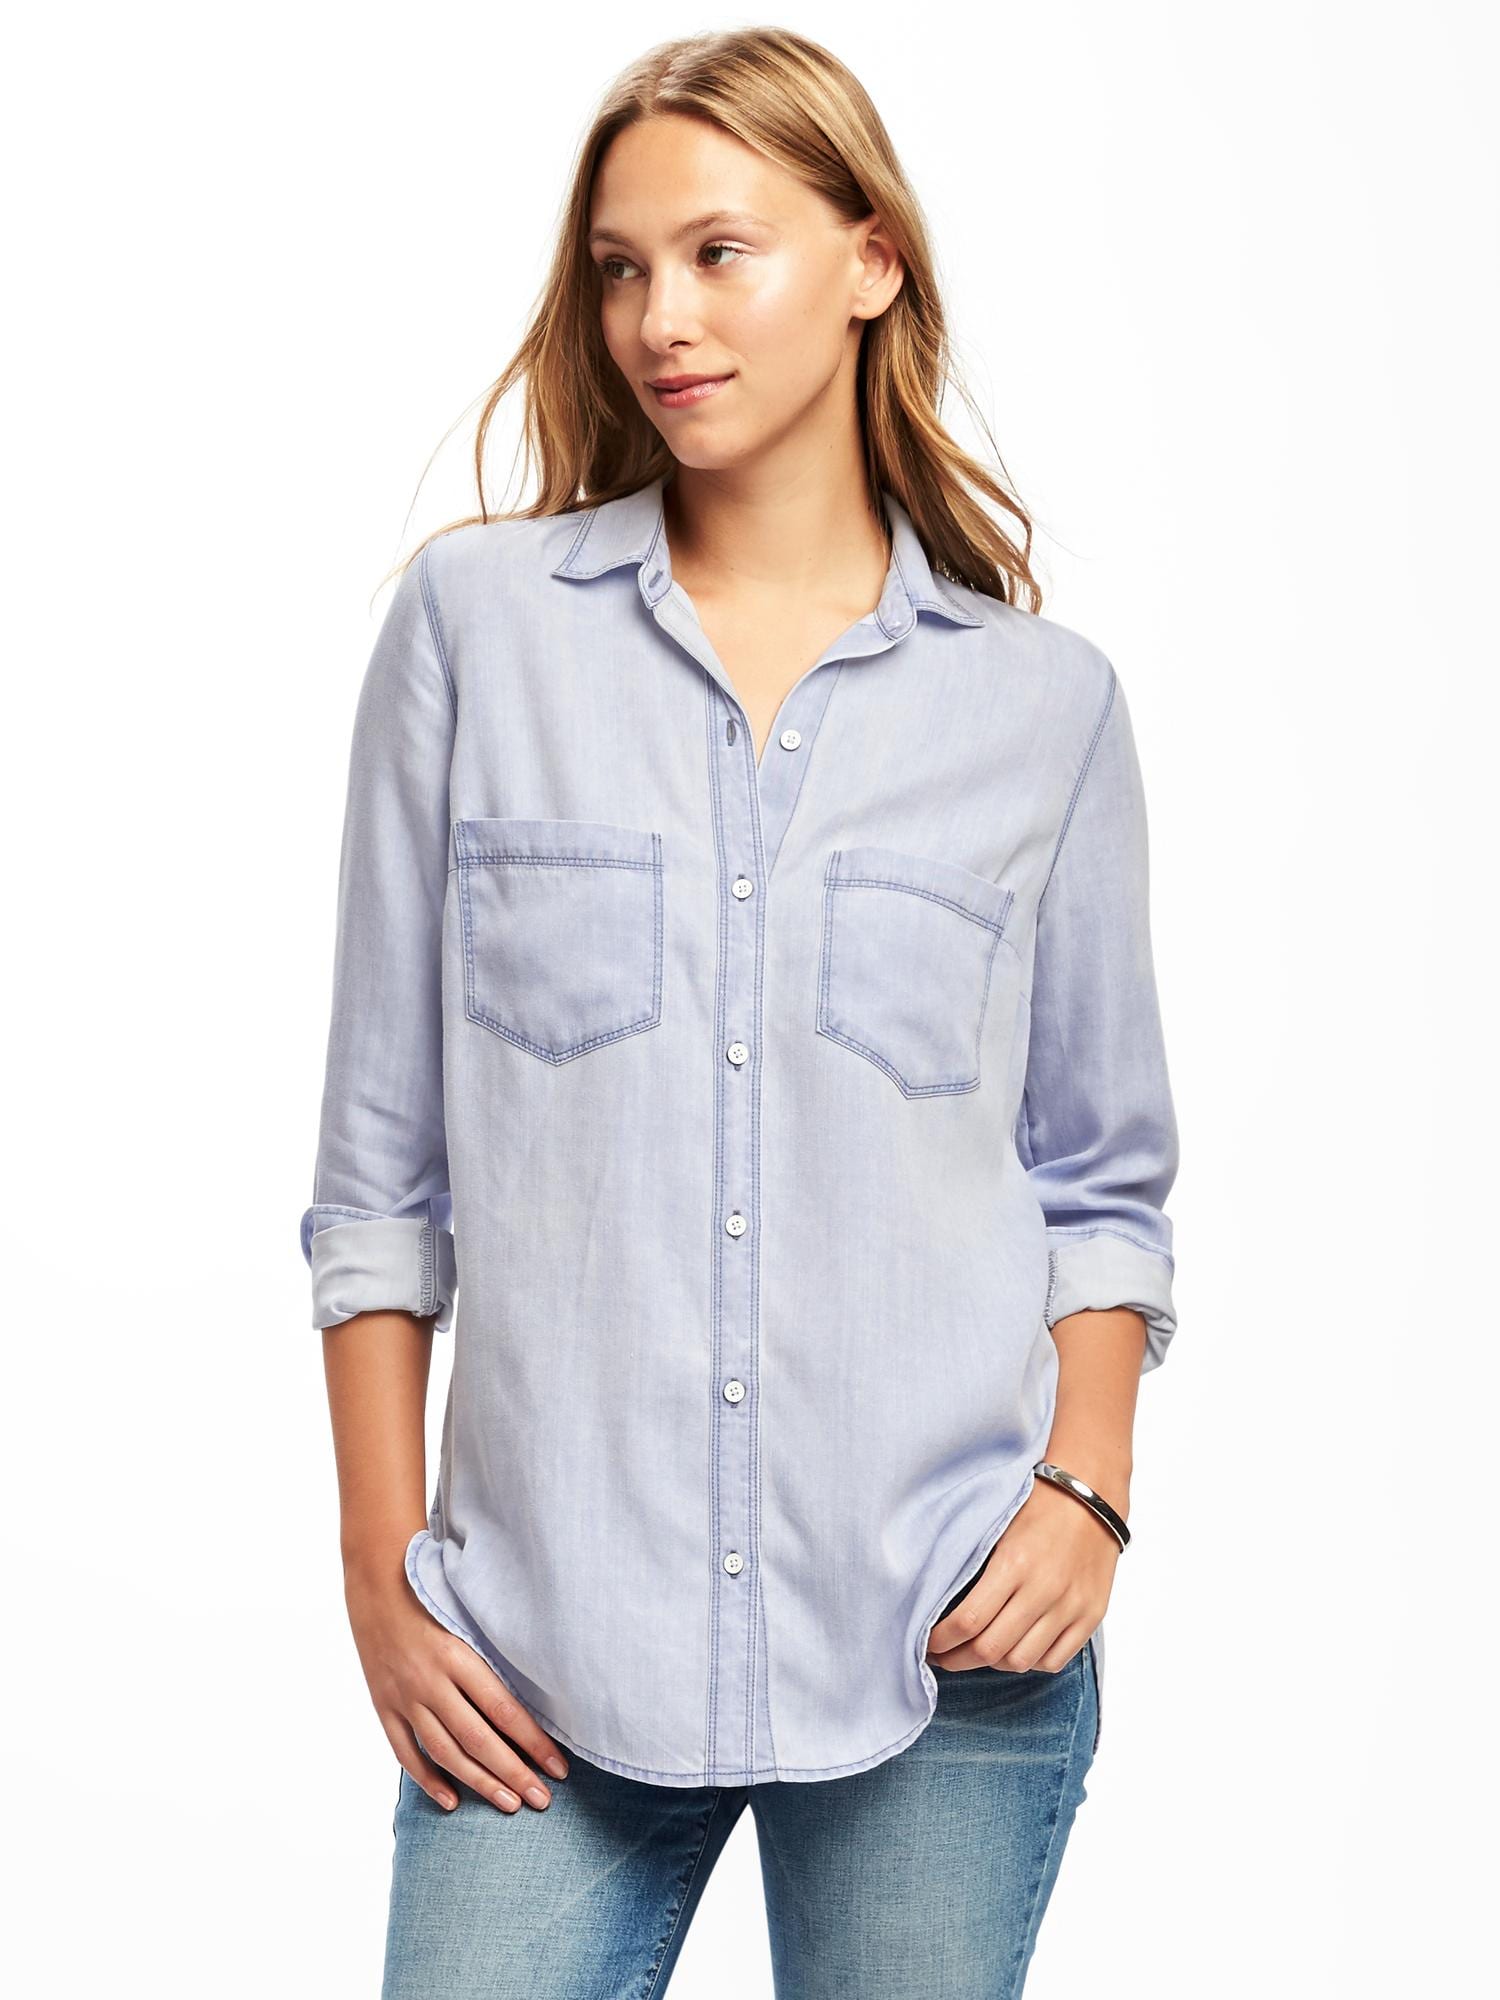 Relaxed Soft Tencel® Shirt for Women | Old Navy